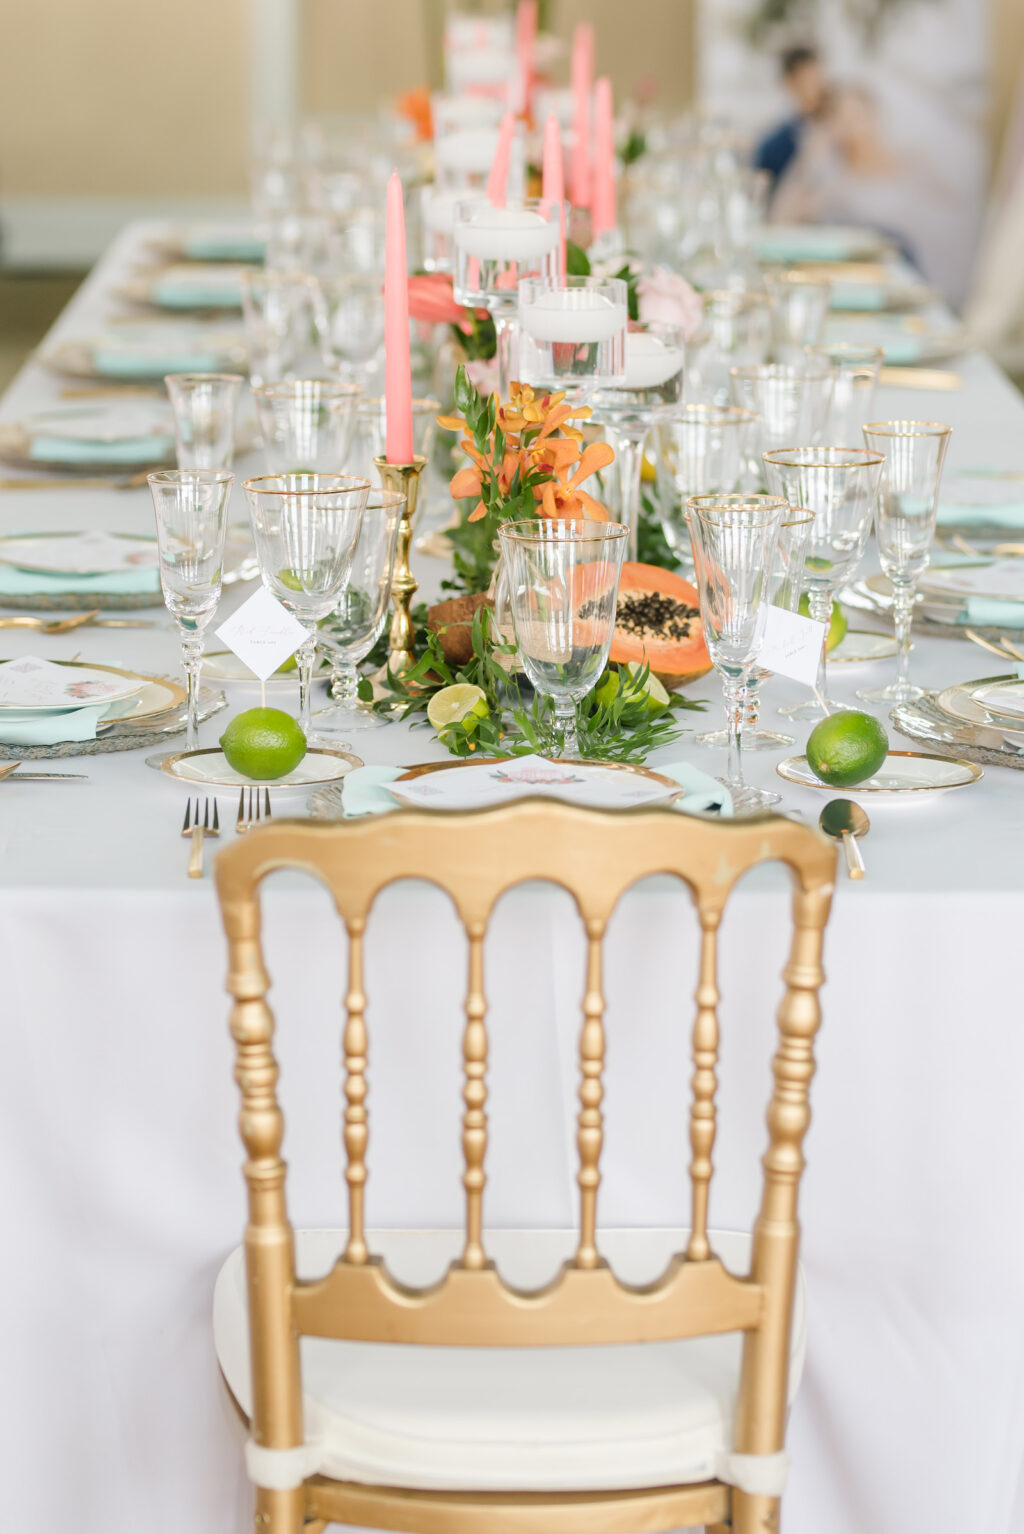 Old Havana Cuba Wedding Reception Decor, White Linen Long Table with Pink Candlesticks, Tropical Fruit Papaya, Limes, Greenery Garland, Vintage Gold Chairs | Tampa Bay Wedding Planner Eventfull Weddings | Wedding Rentals Gabro Event Services, A Chair Affair